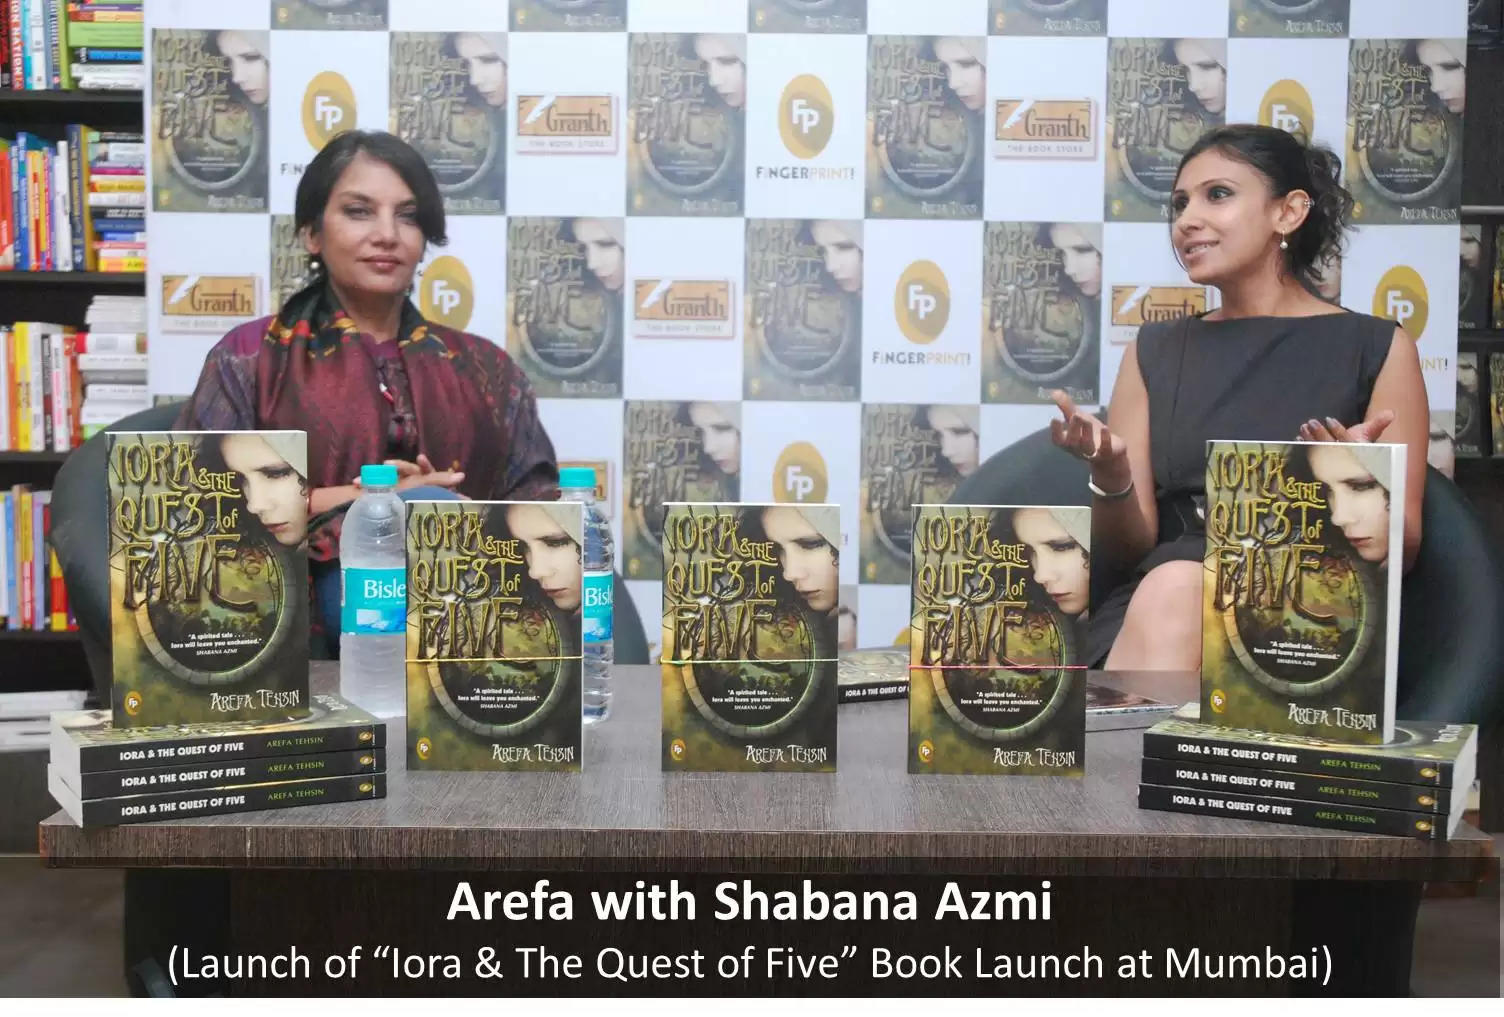 Arefa Tehsin Shabana Azmi Iora Quest of Five Book Launch Mumbai Author from Udaipur People of Udaipur